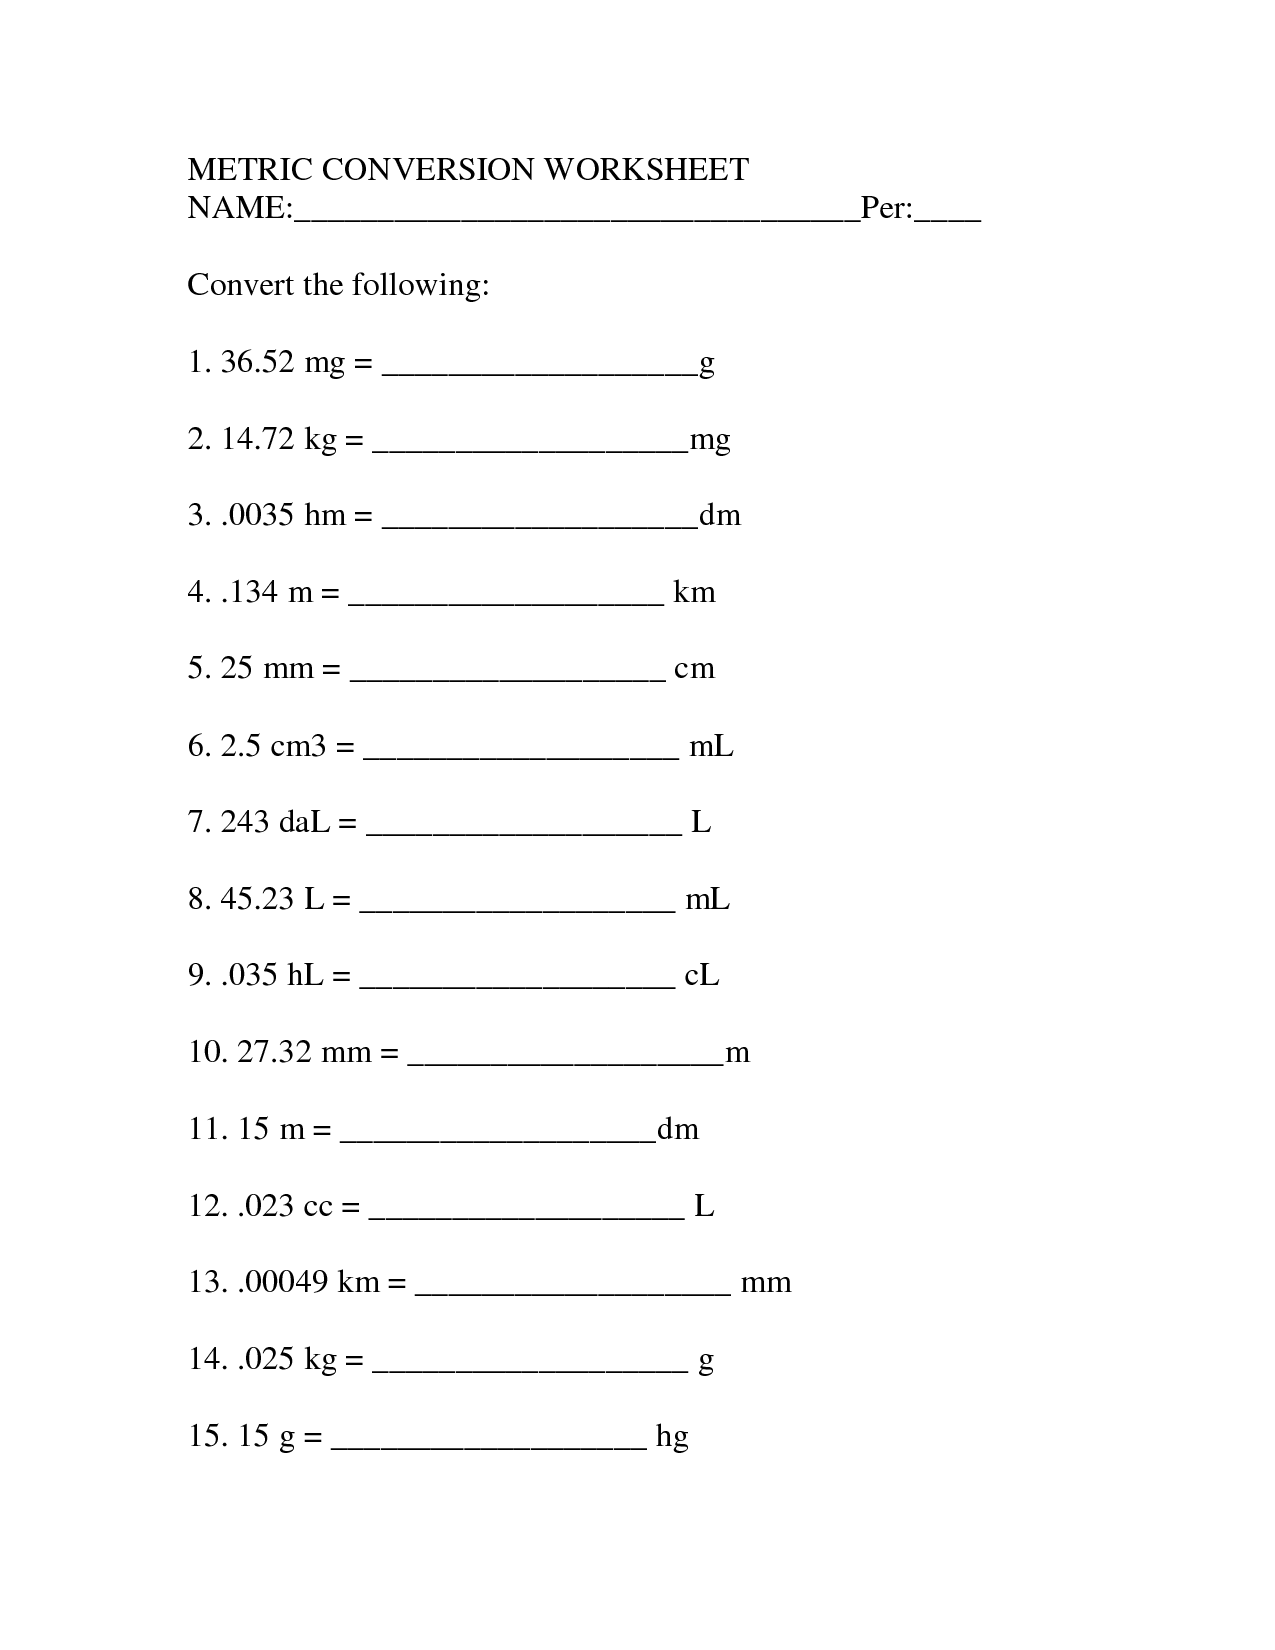 metric-system-conversion-worksheets-with-answers